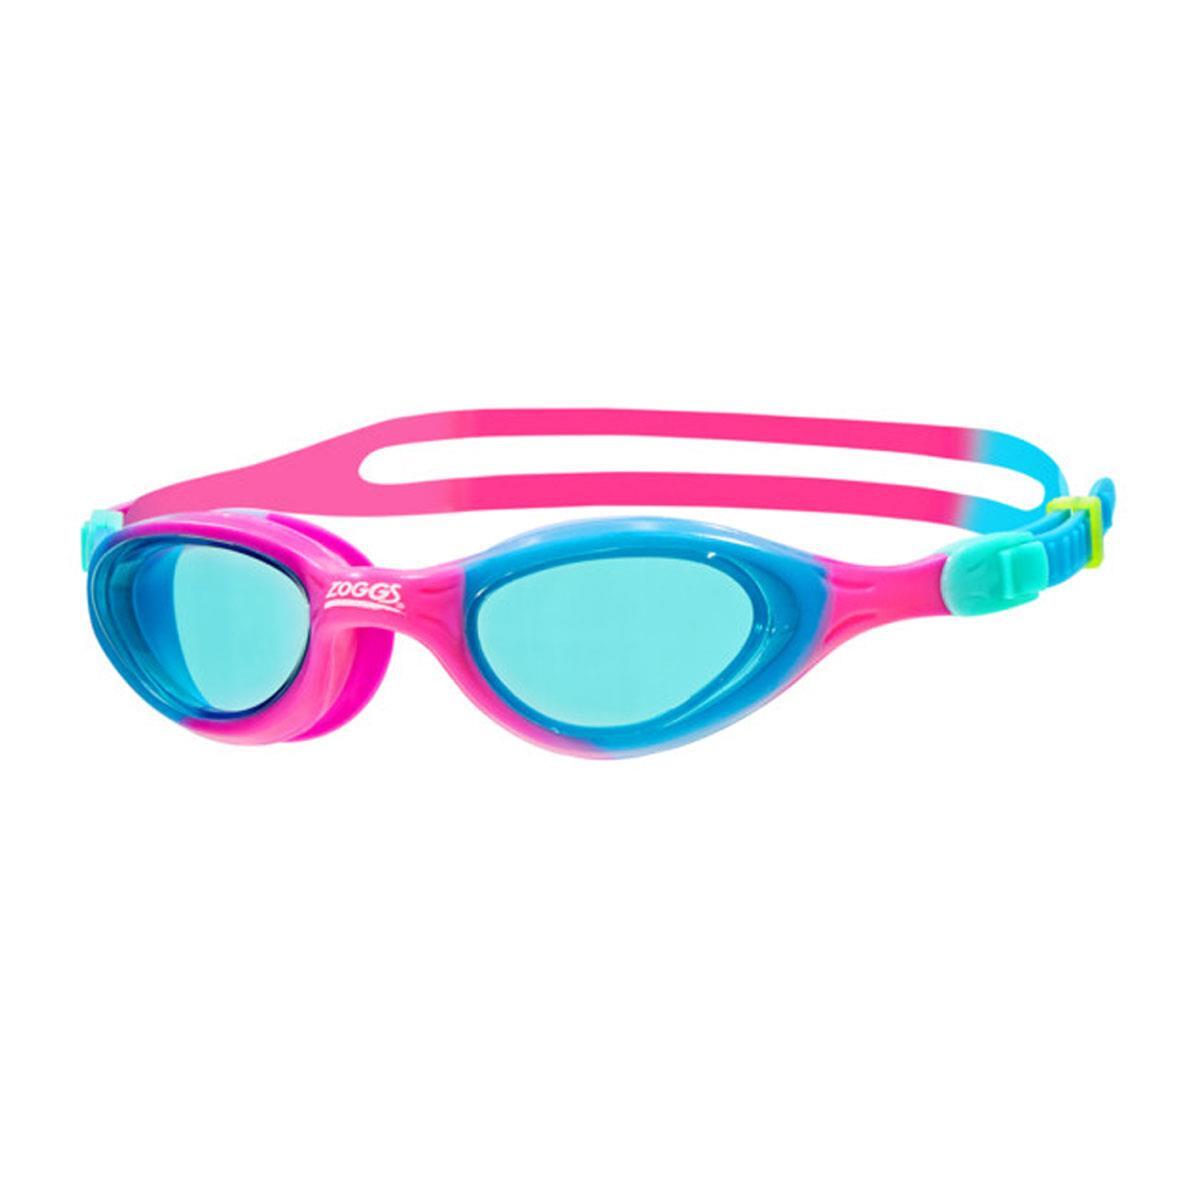 ZOGGS Zoggs Super Seal Goggles - Pink/Blue Tint